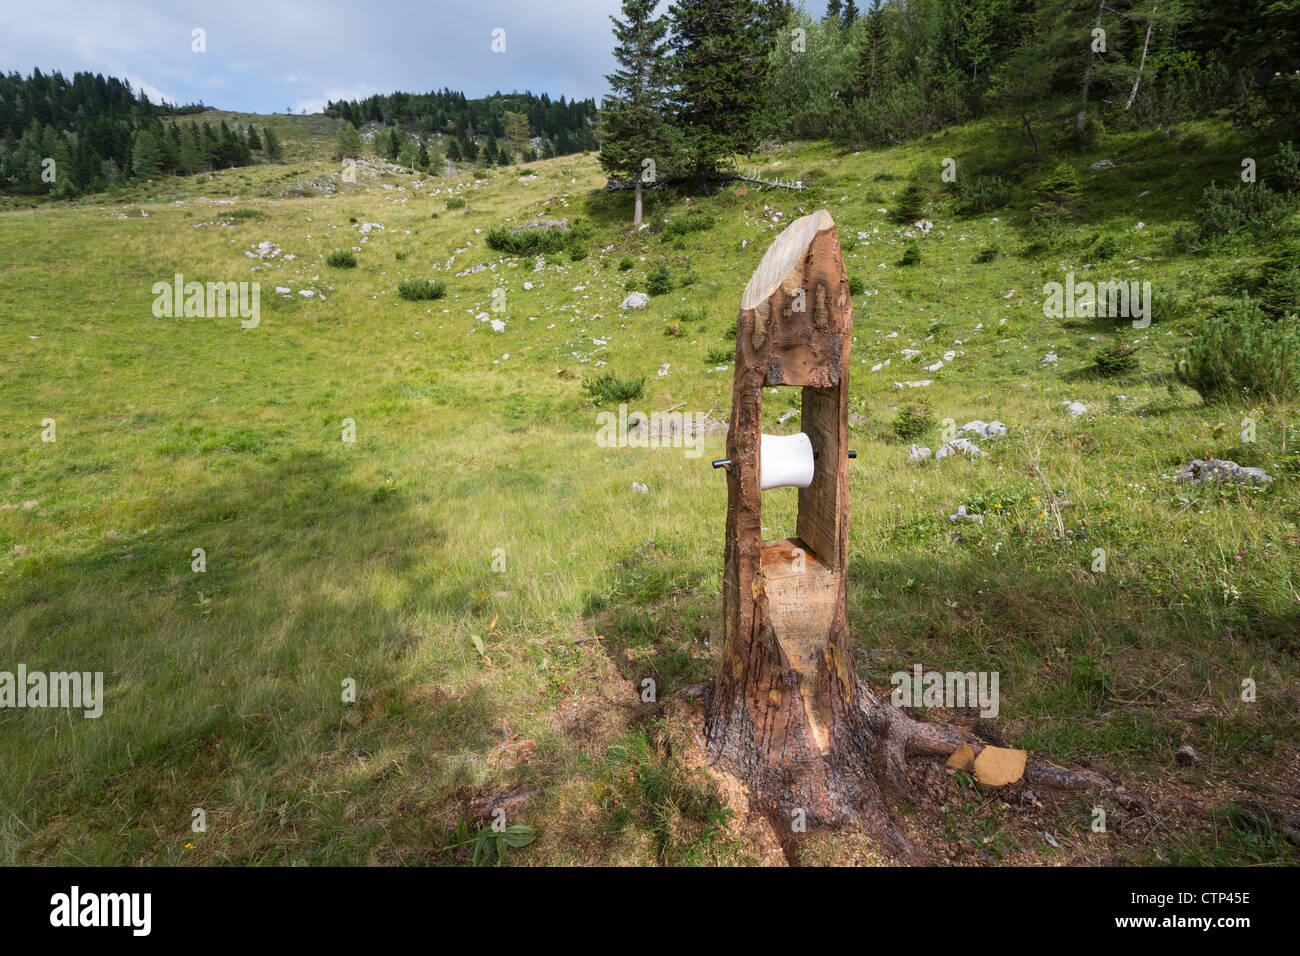 A 'salt lick' fashioned out of a tree stump for wildlife management in the Kamnik Alps of Slovenia. Stock Photo